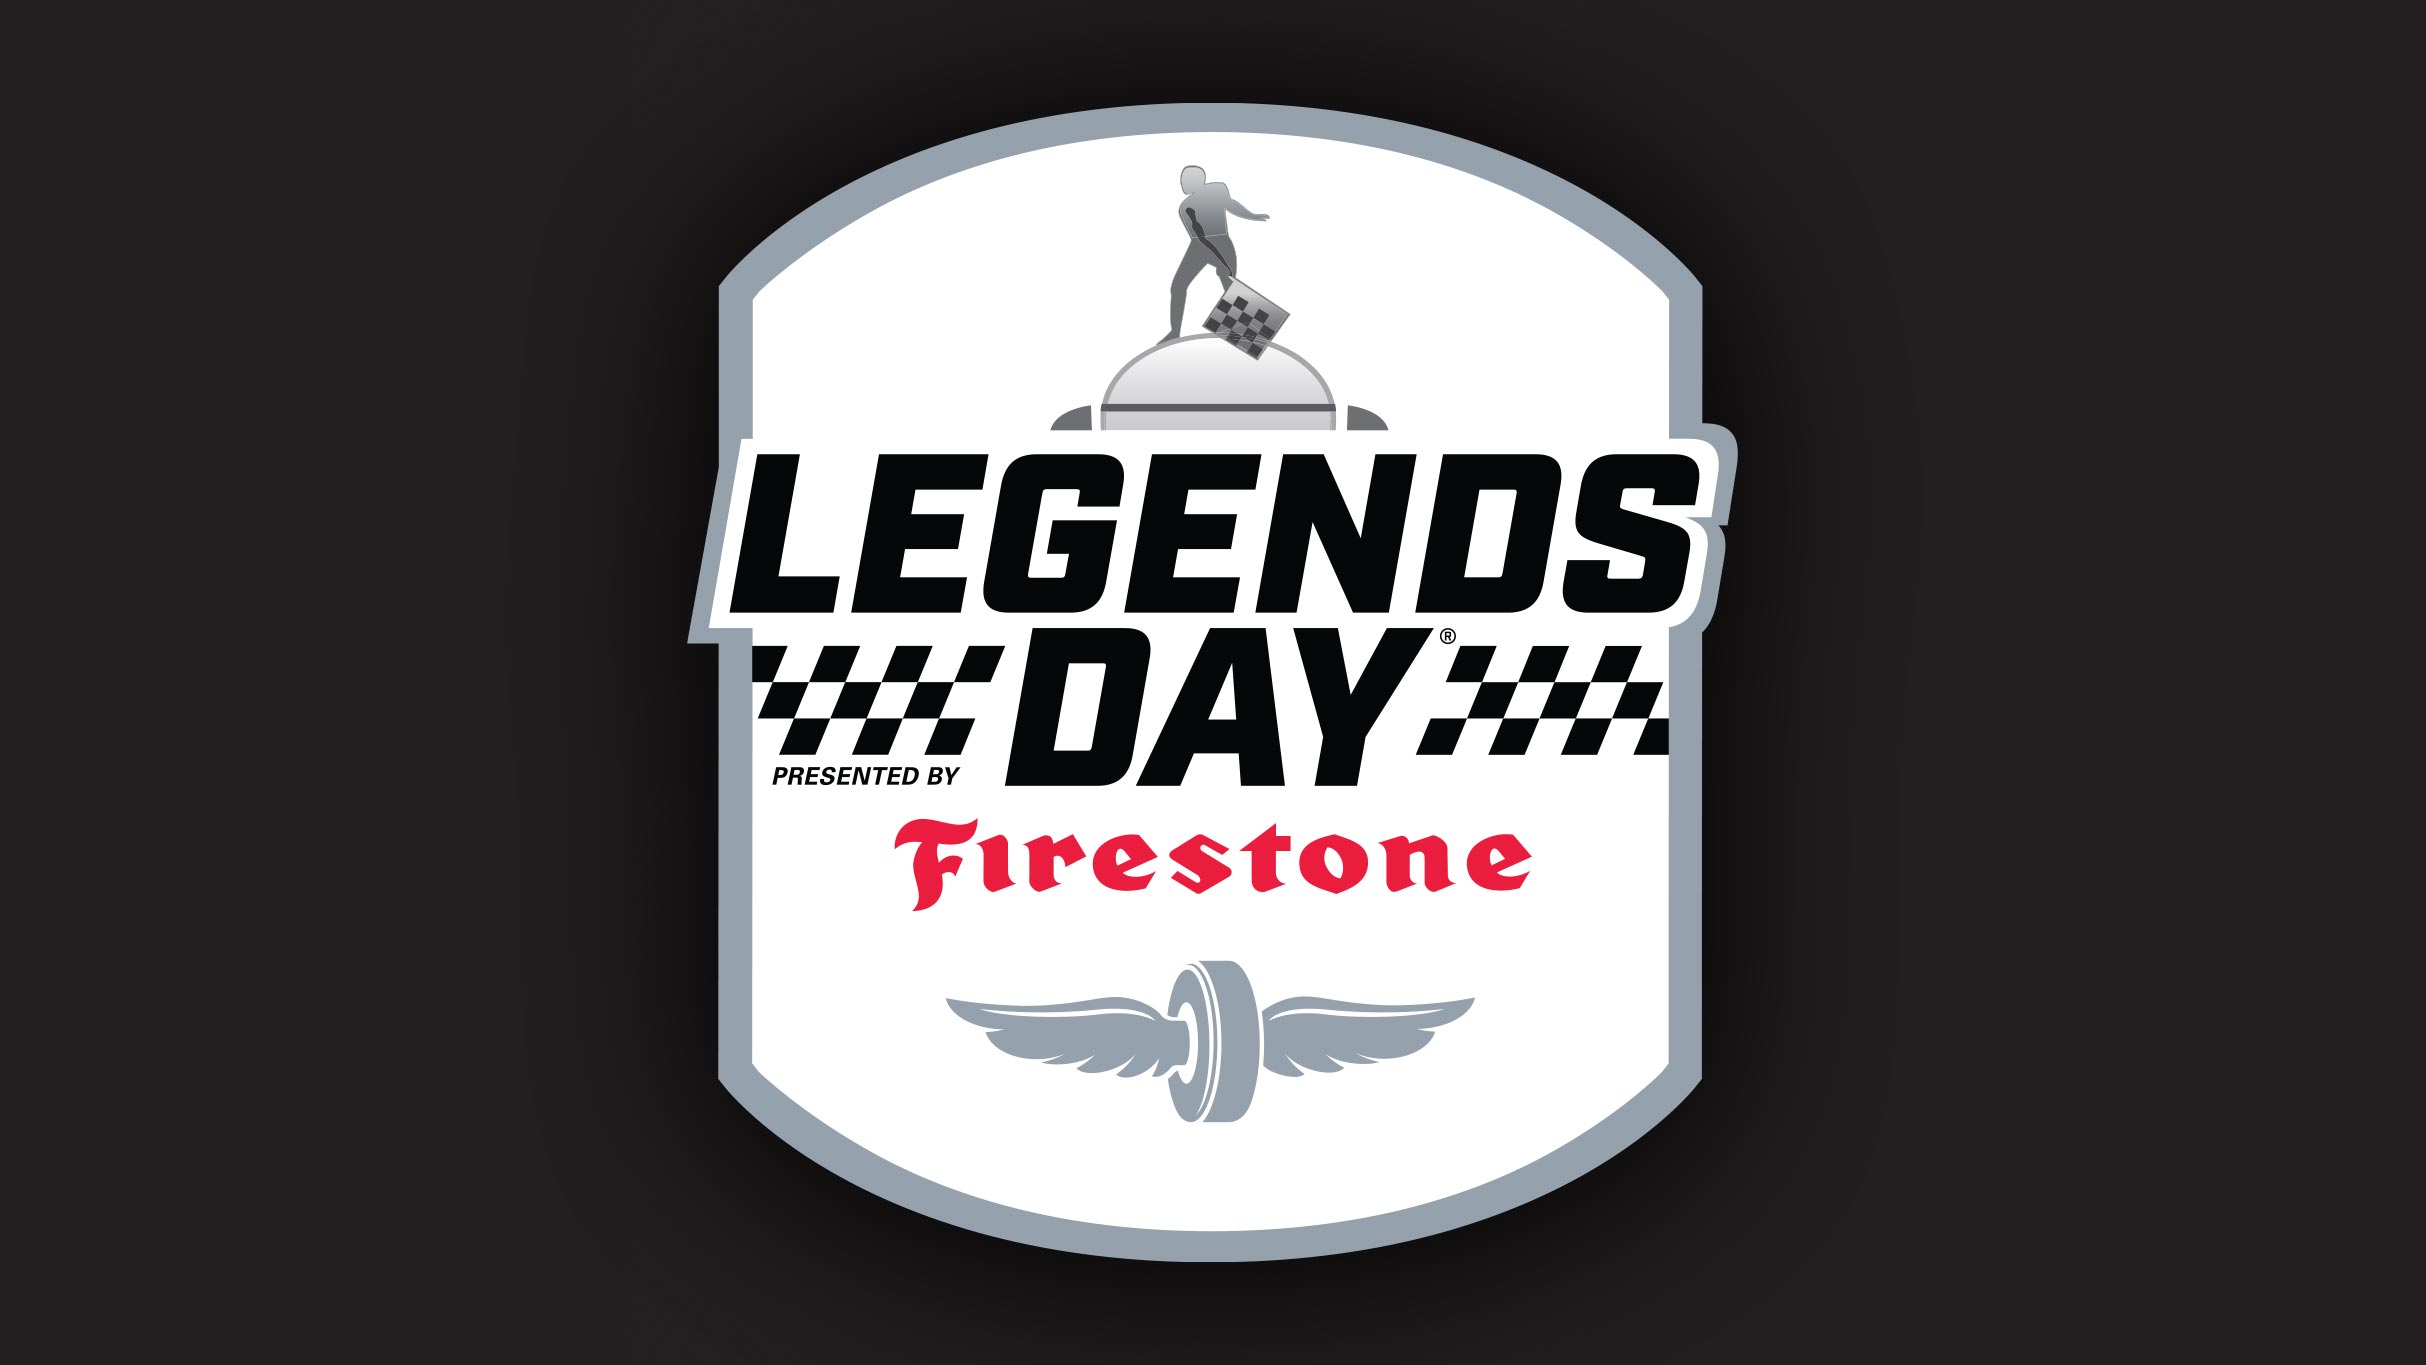 Firestone Legends Day Concert Featuring Brad Paisley in Indianapolis promo photo for TCU Employee  presale offer code